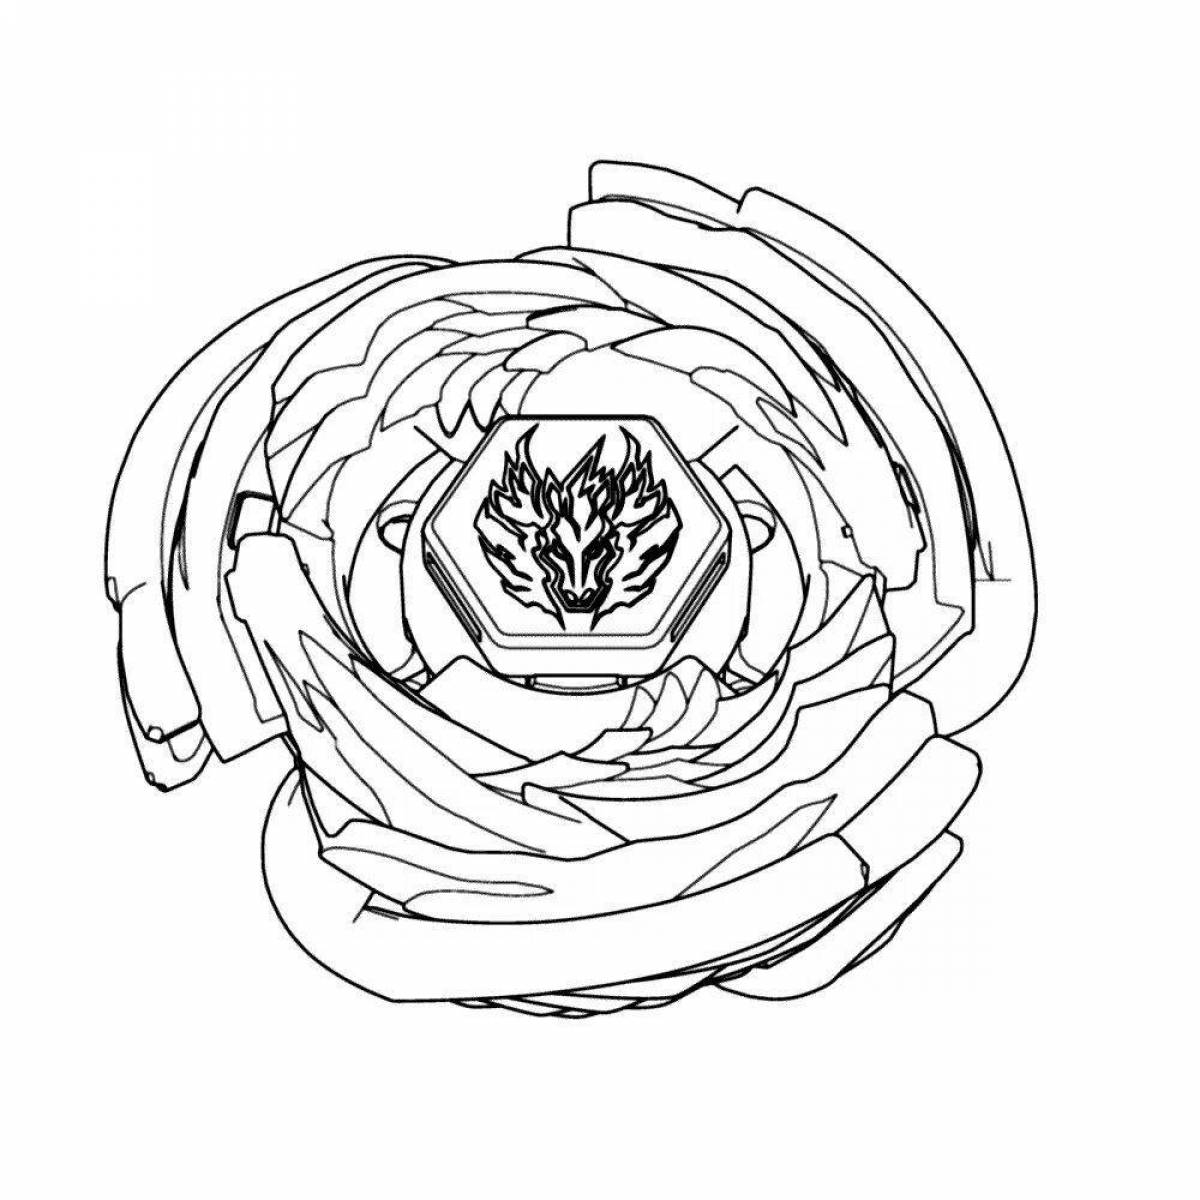 Adorable beyblade coloring page